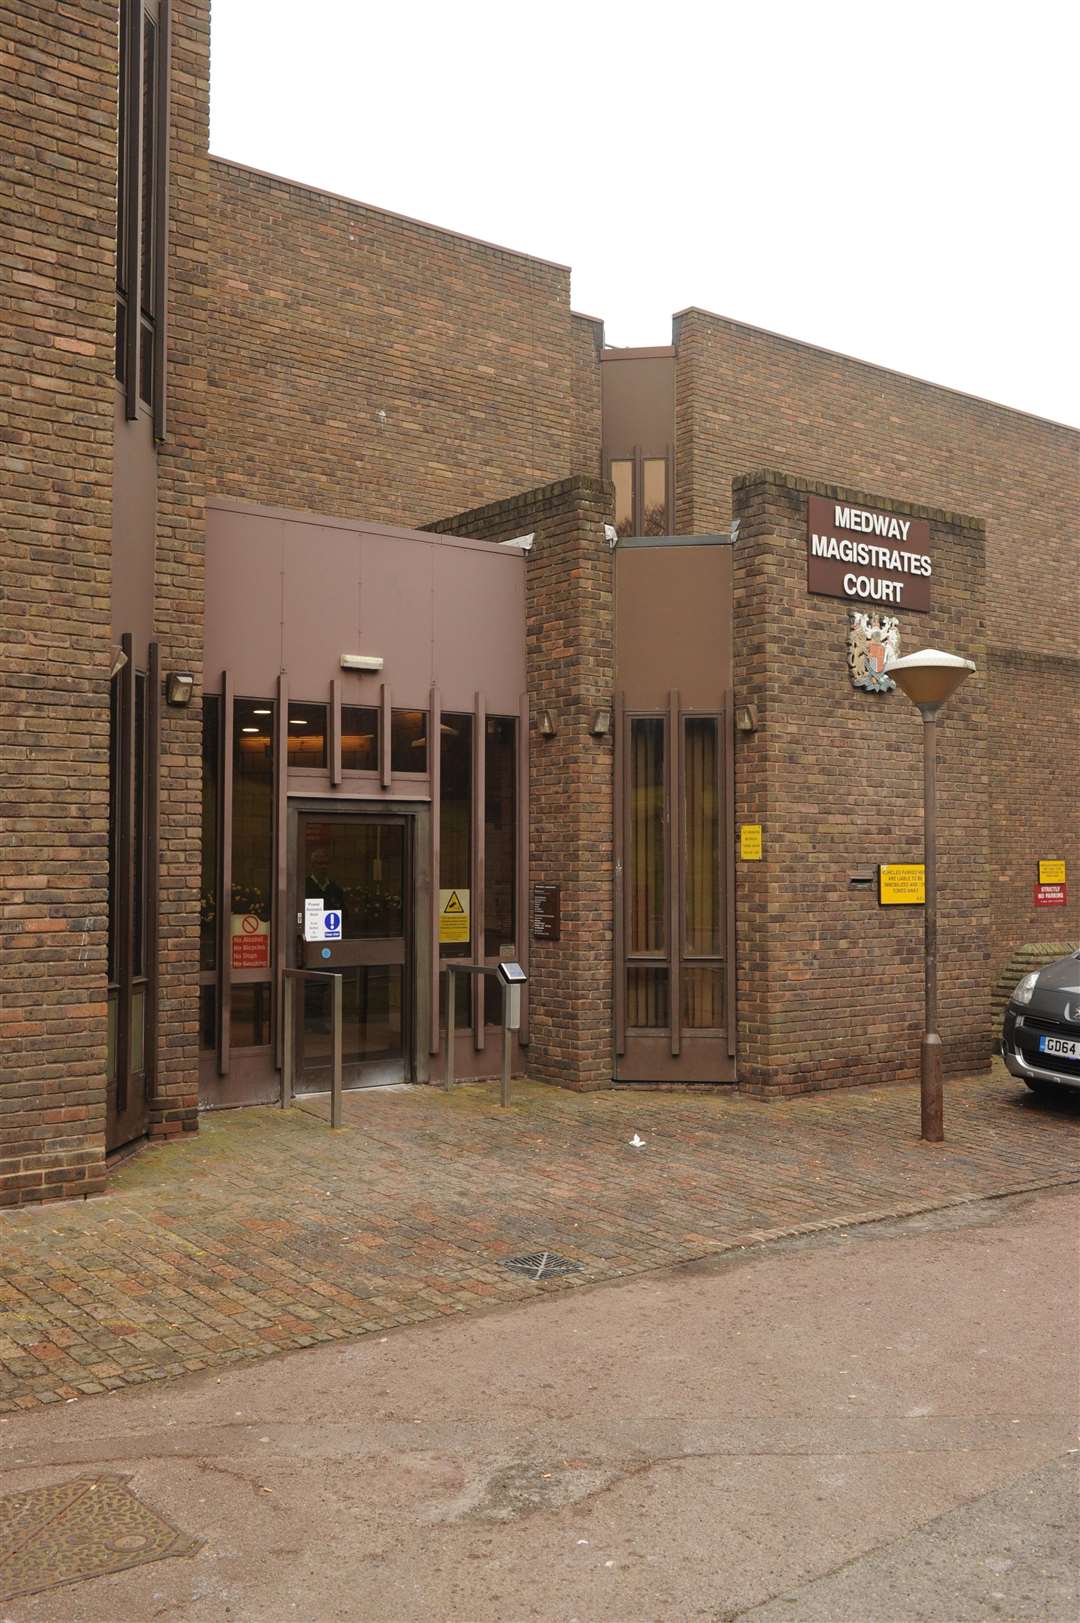 Weston was remanded in custody at Medway Magistrates Court, Chatham